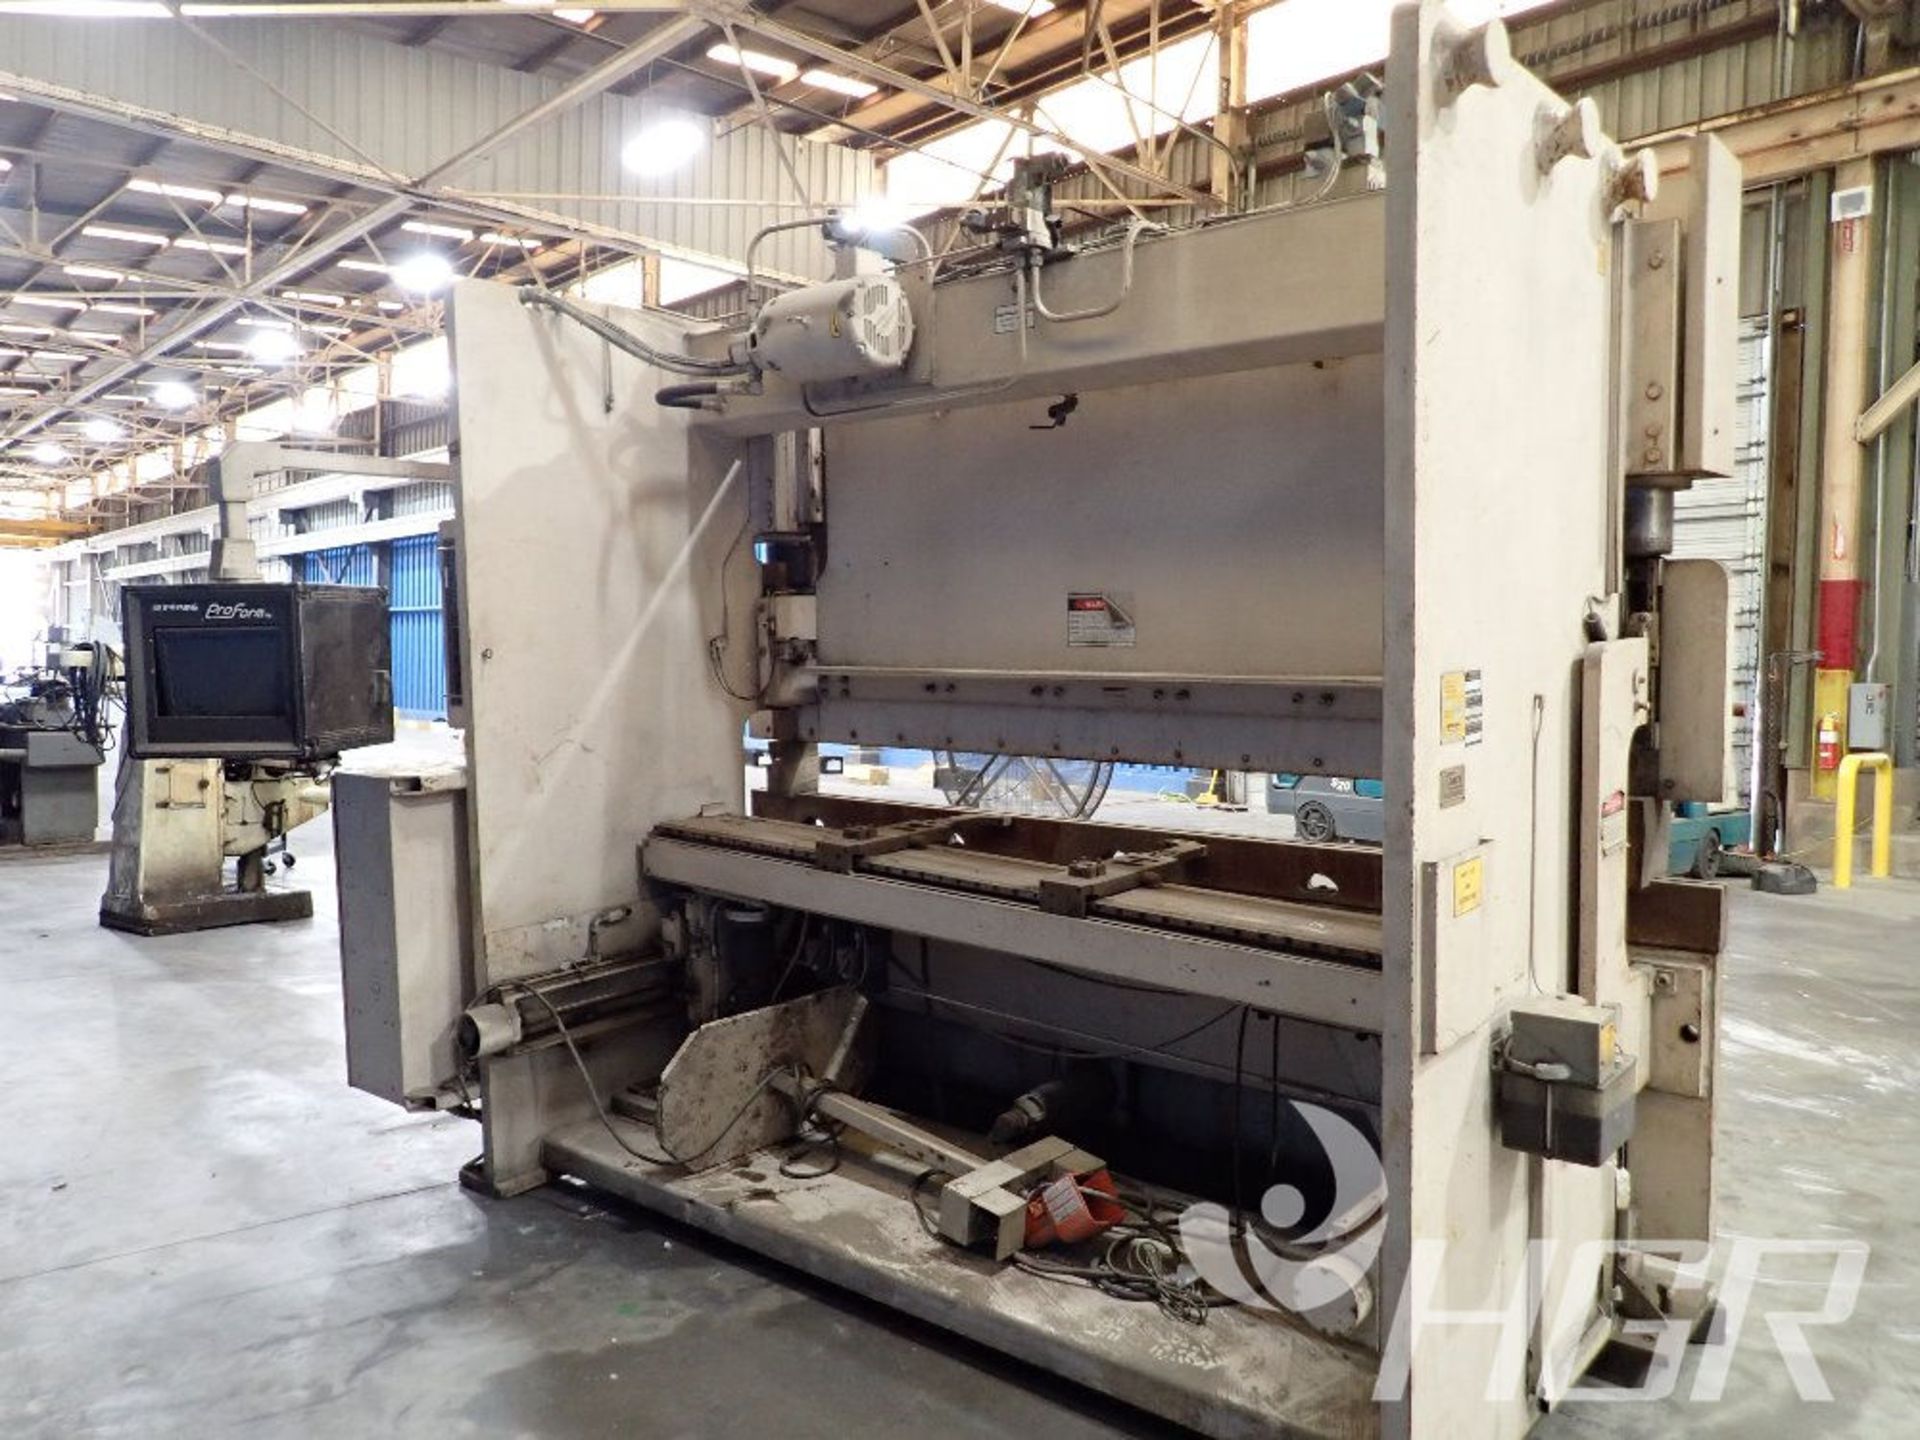 WYSONG CNC PRESS BRAKE, Model PHP100-120, Date: n/a; s/n HPB46-127-X, Approx. Capacity: 100 TON 10', - Image 19 of 25